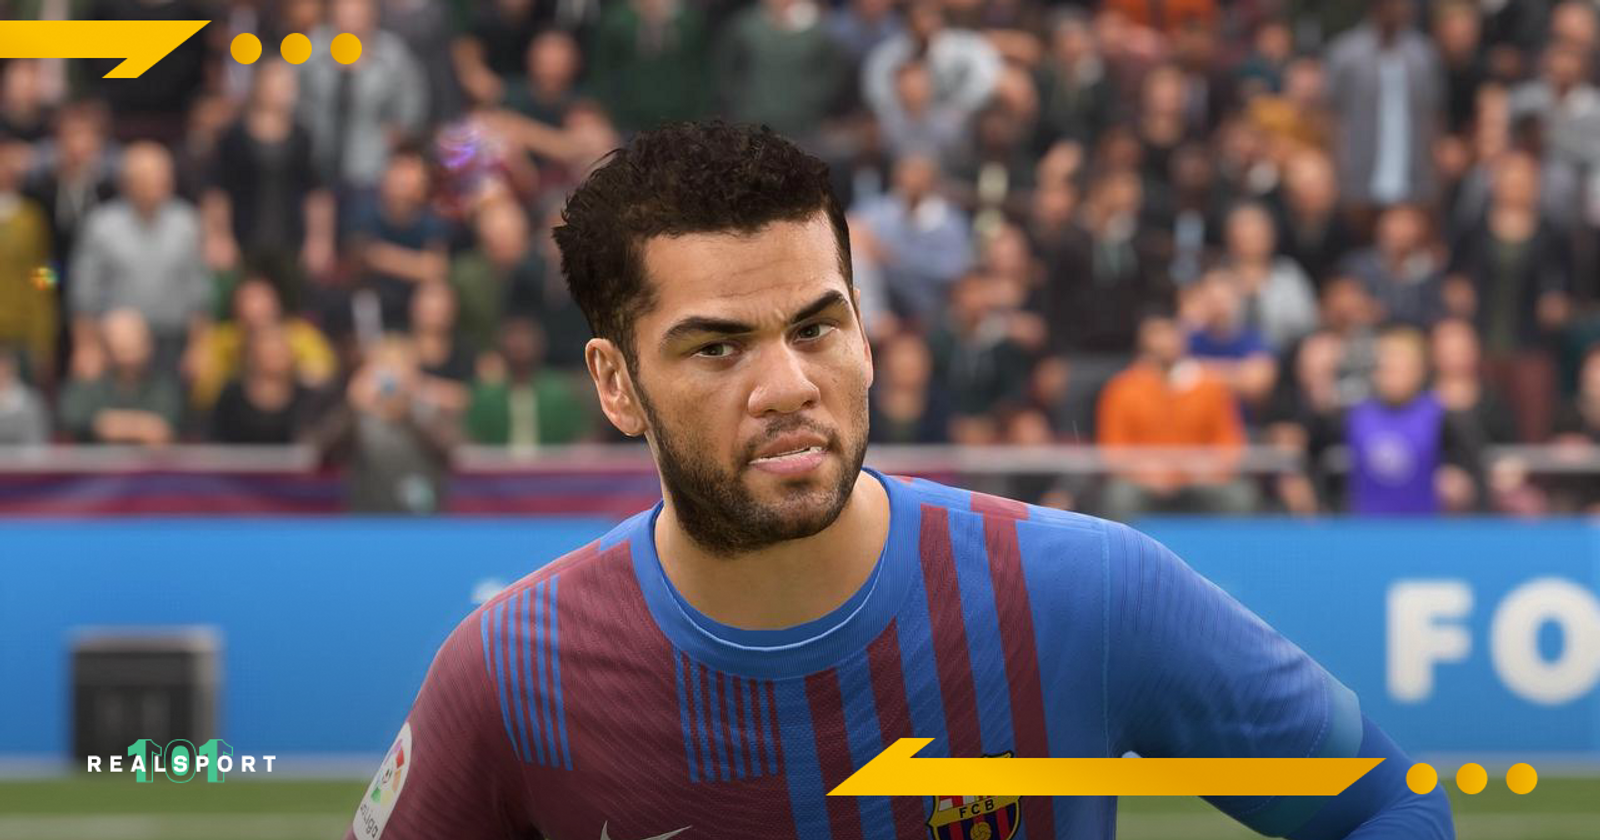 FIFA 21 Title Update 6 available to download now on Xbox and